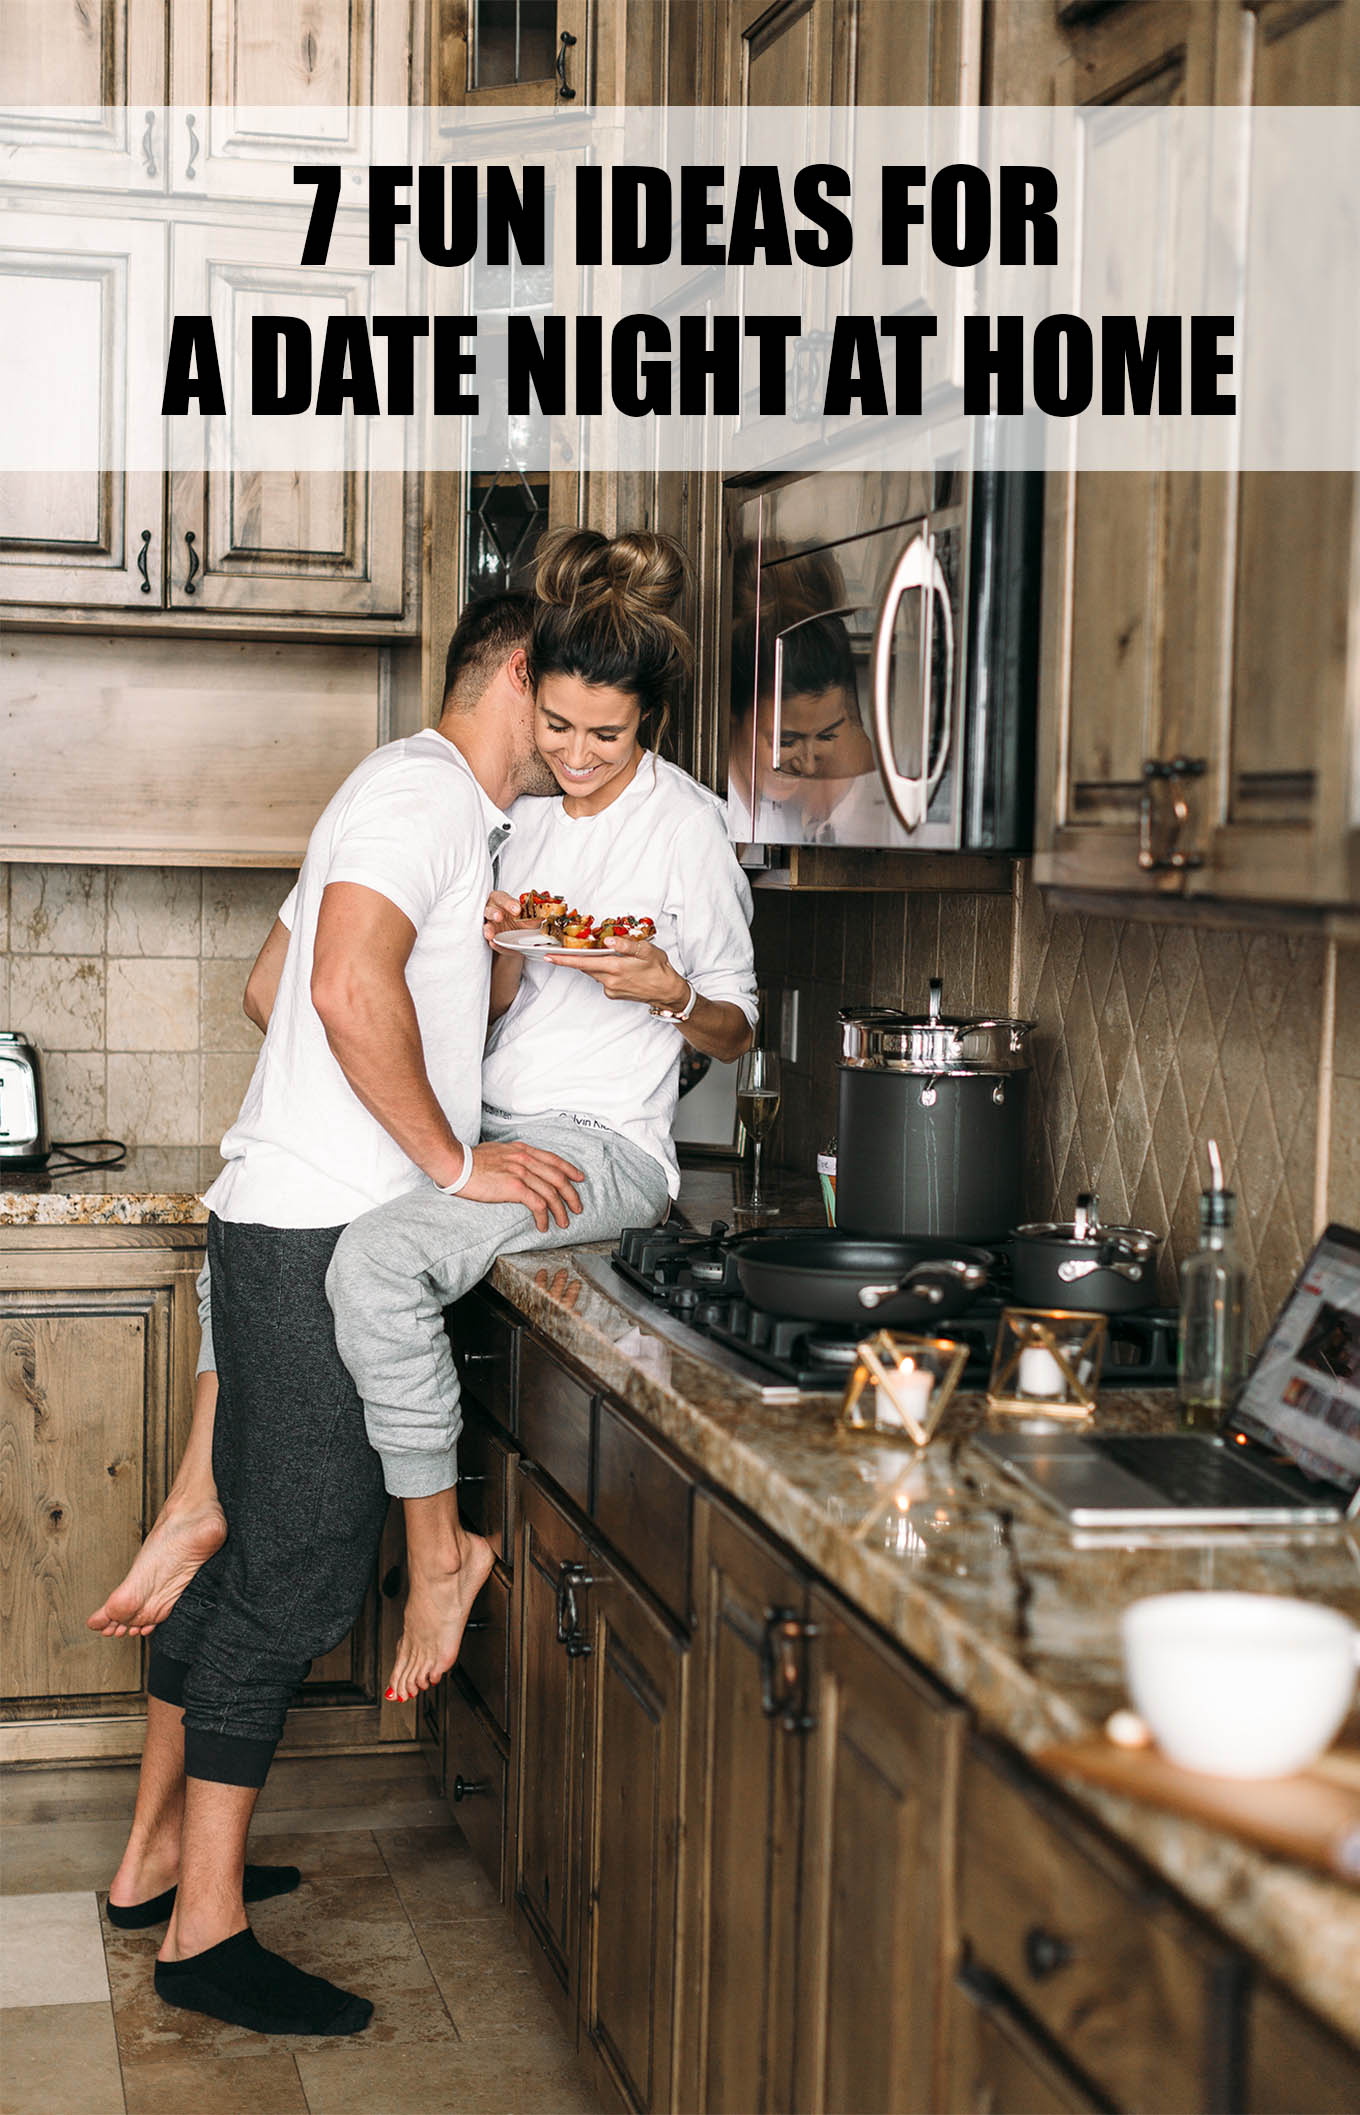 7 Fun Ideas for a Date Night At Home | Hello Fashion